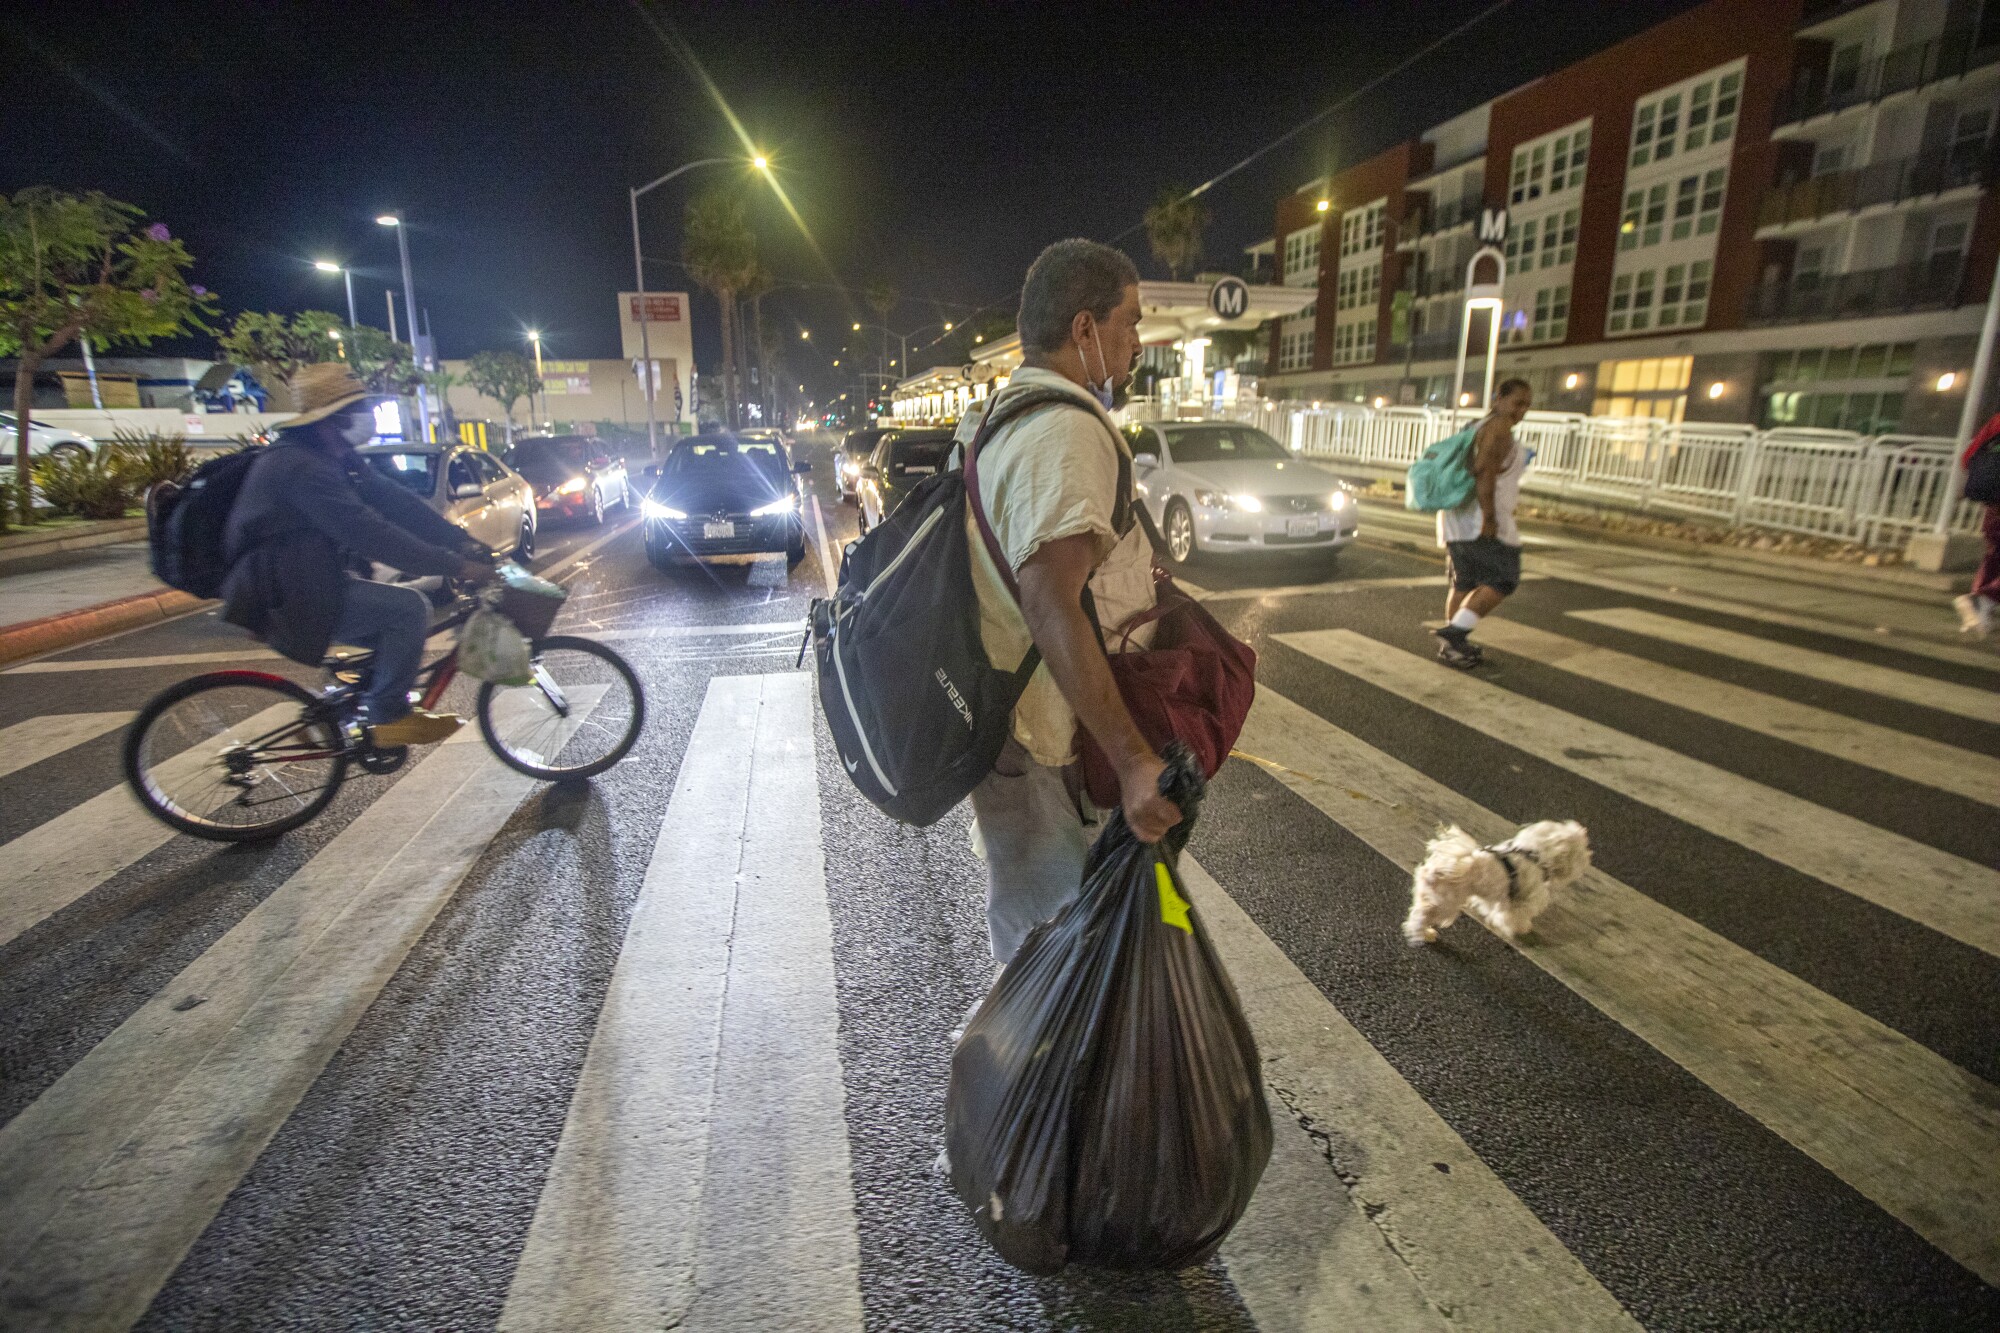 A man crosses an intersection carrying a garbage bag